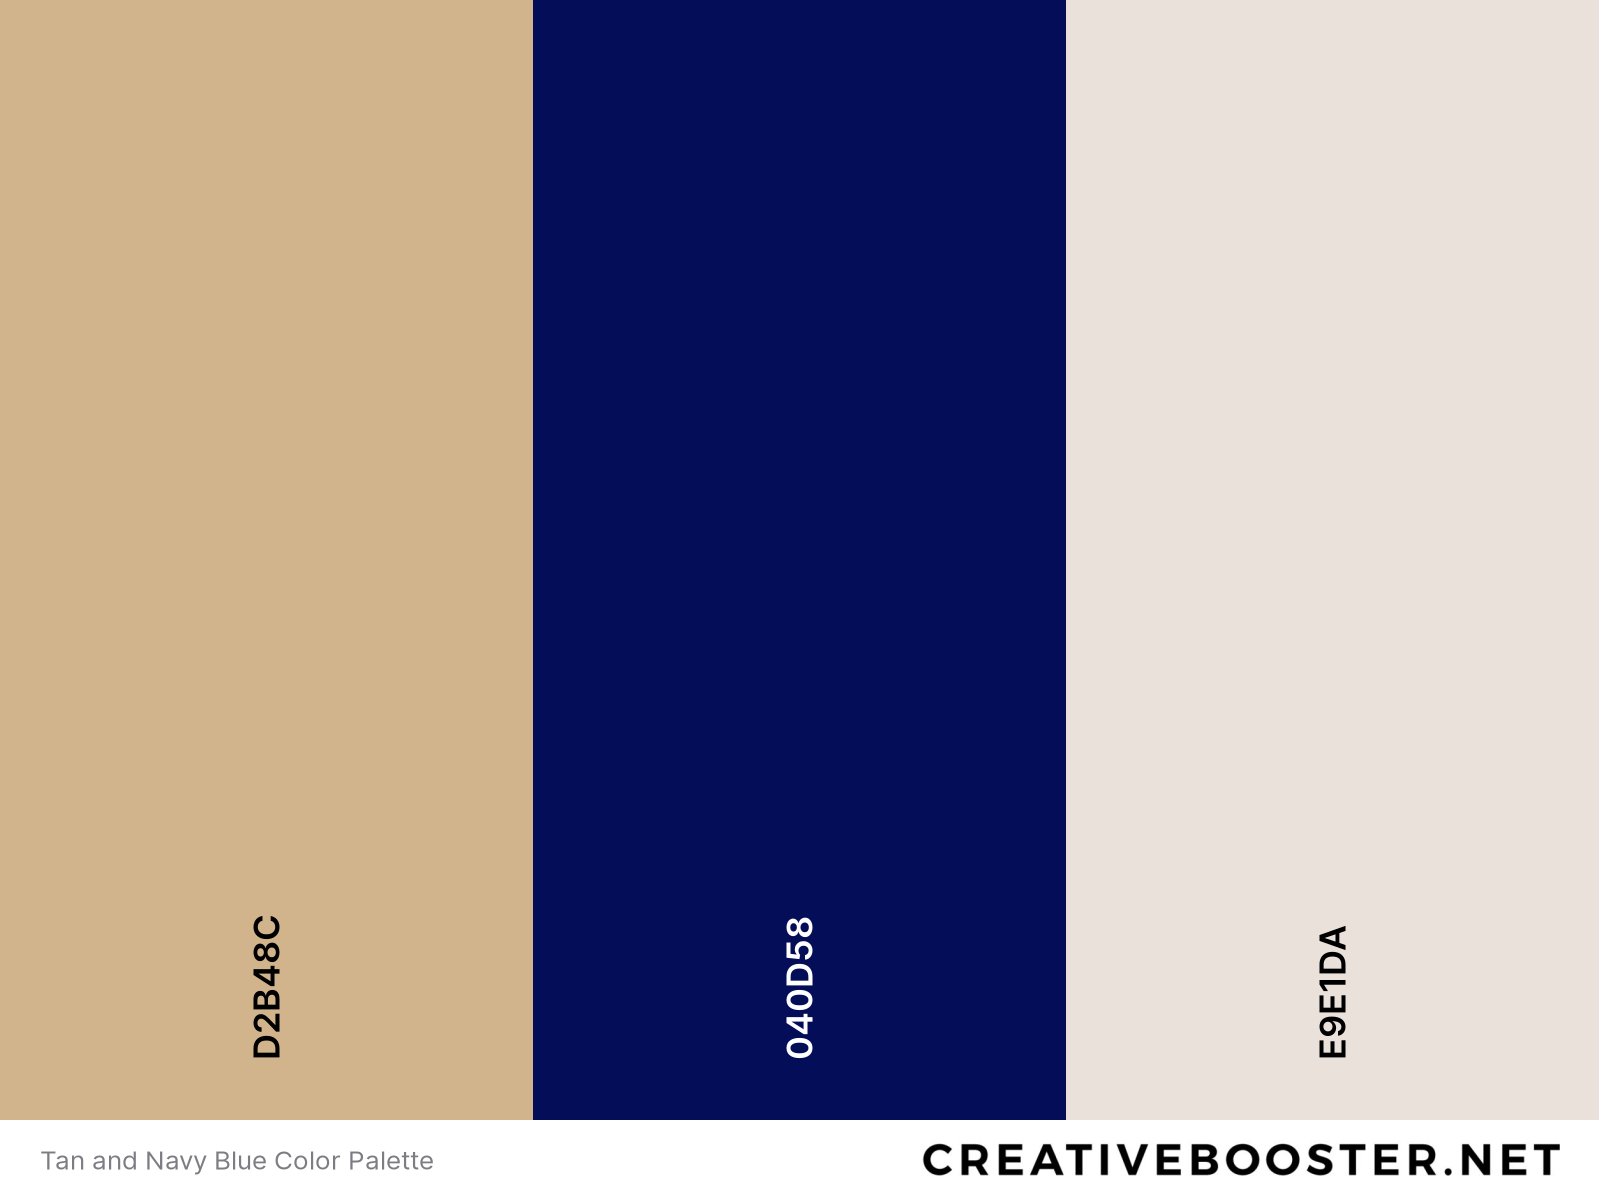 Tan and Navy Blue Color Palette